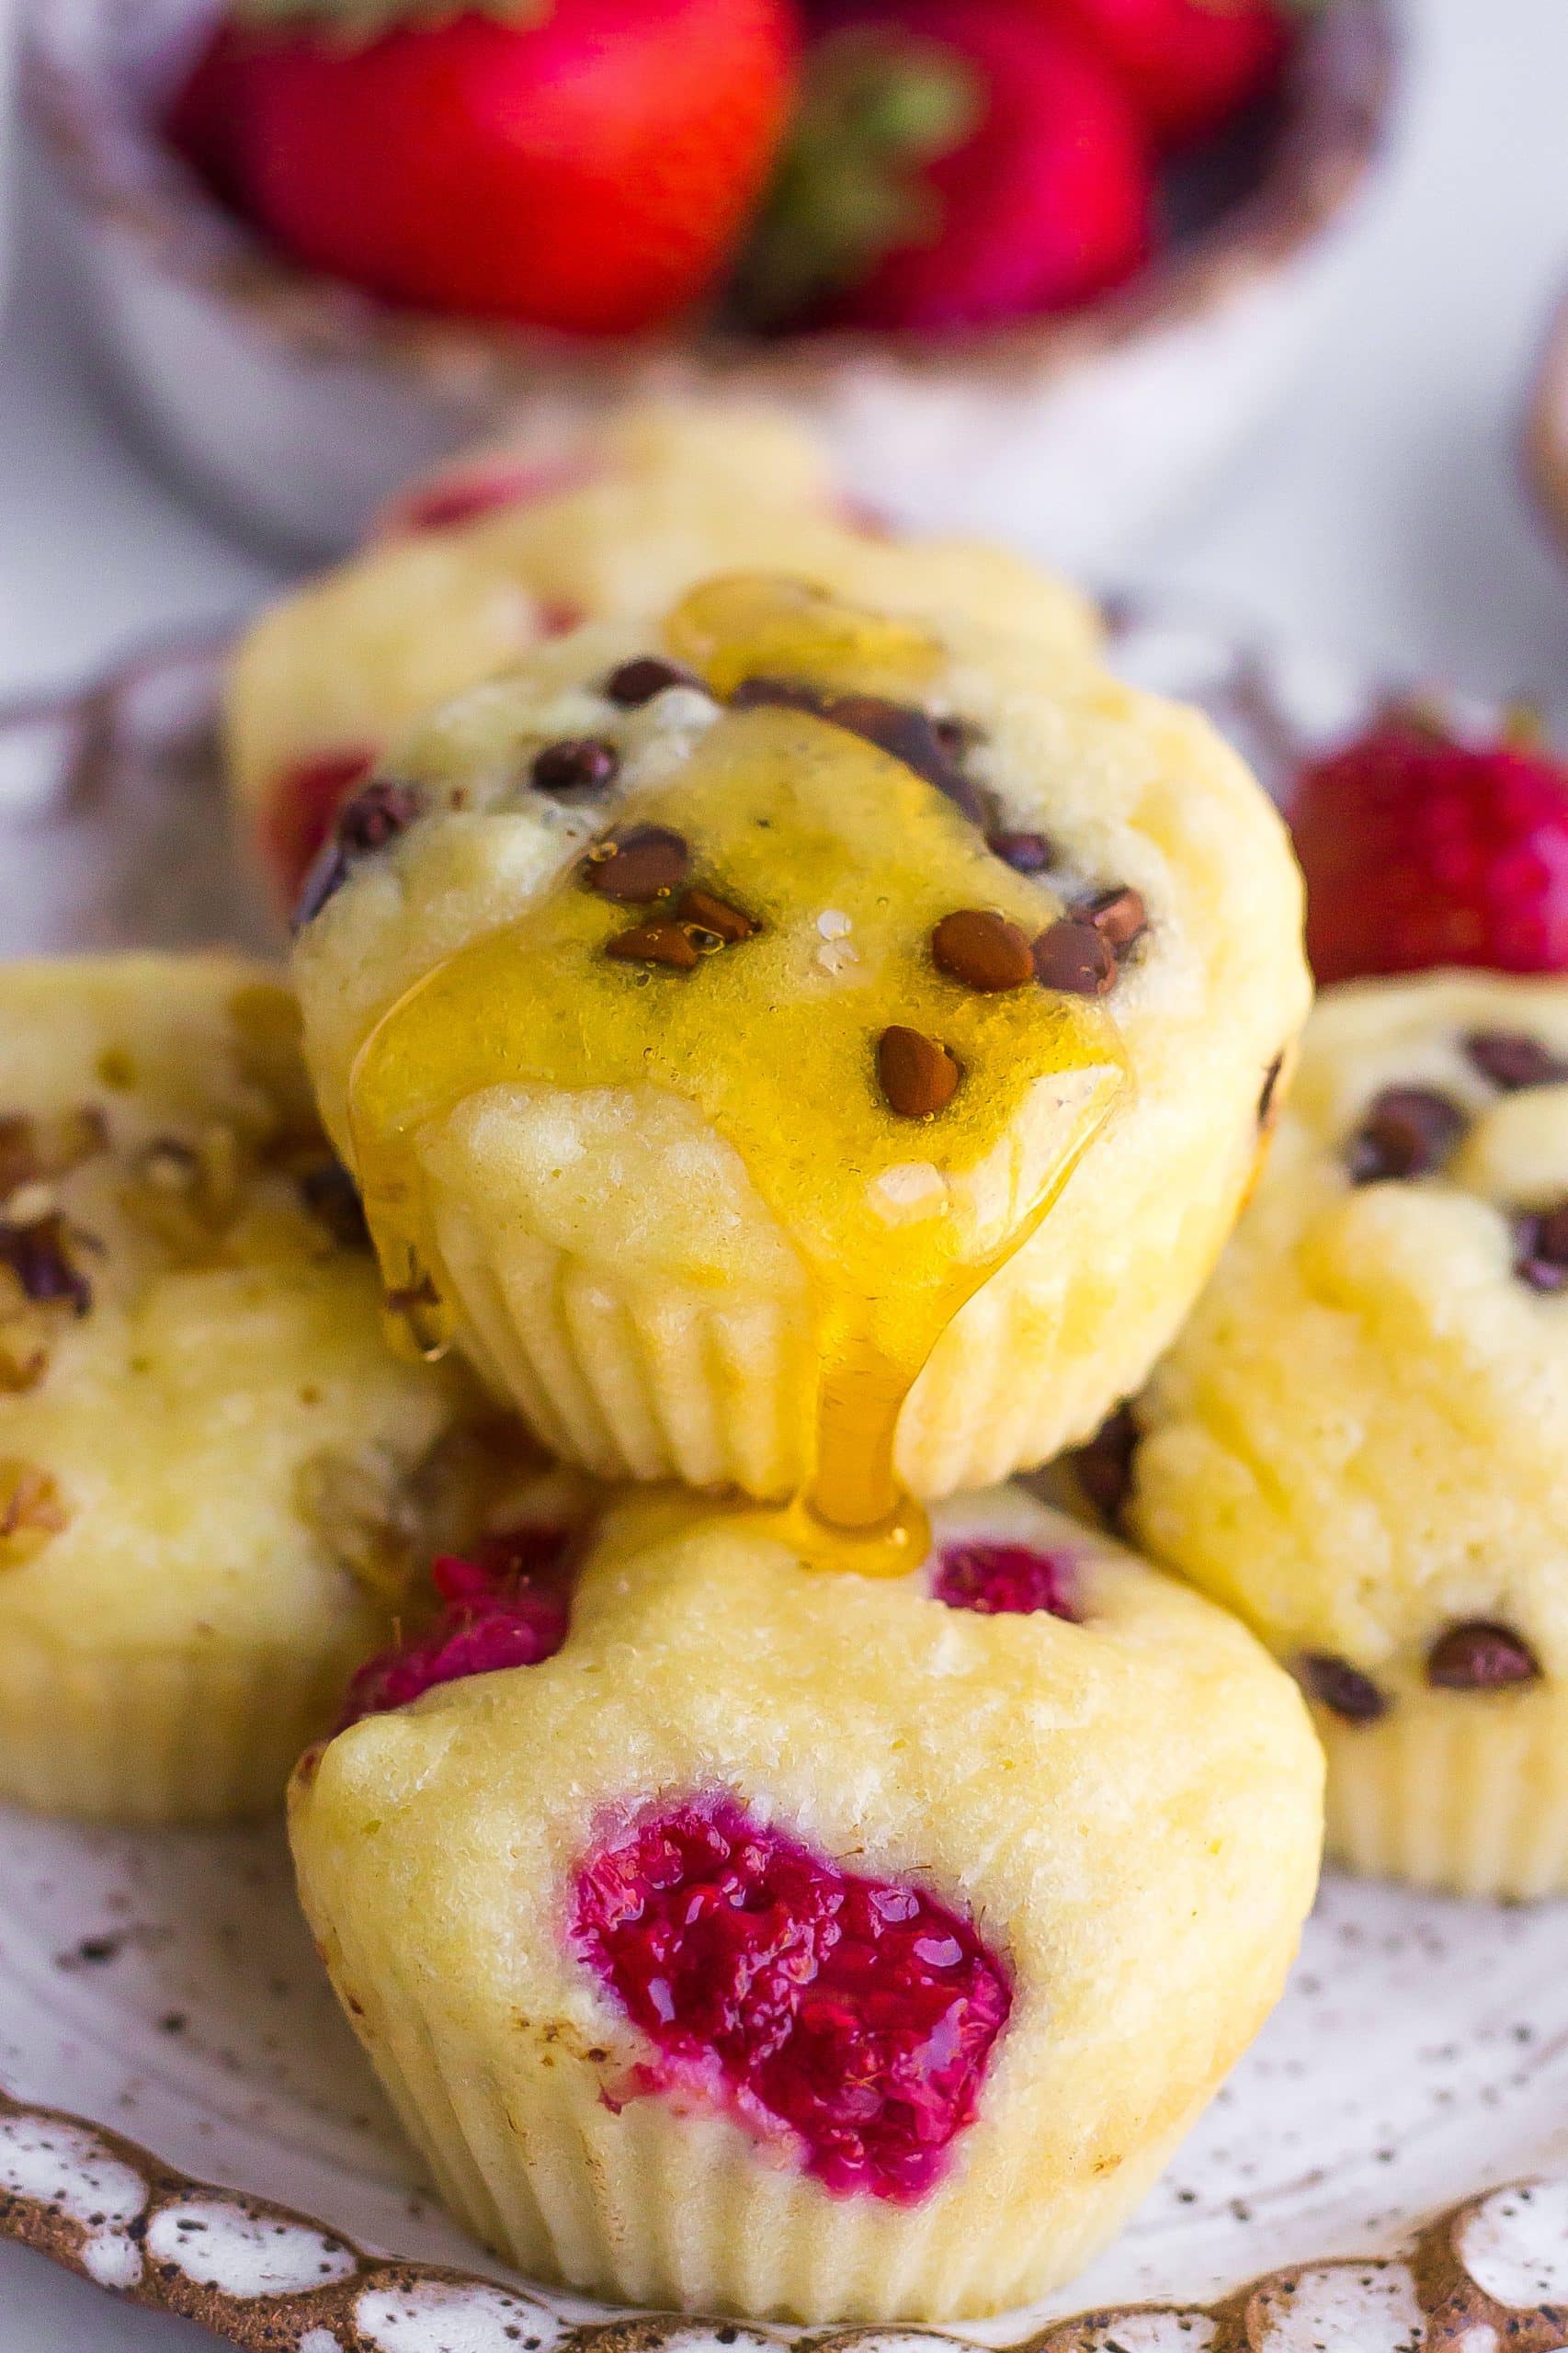 Pancake muffin drizzled with honey.